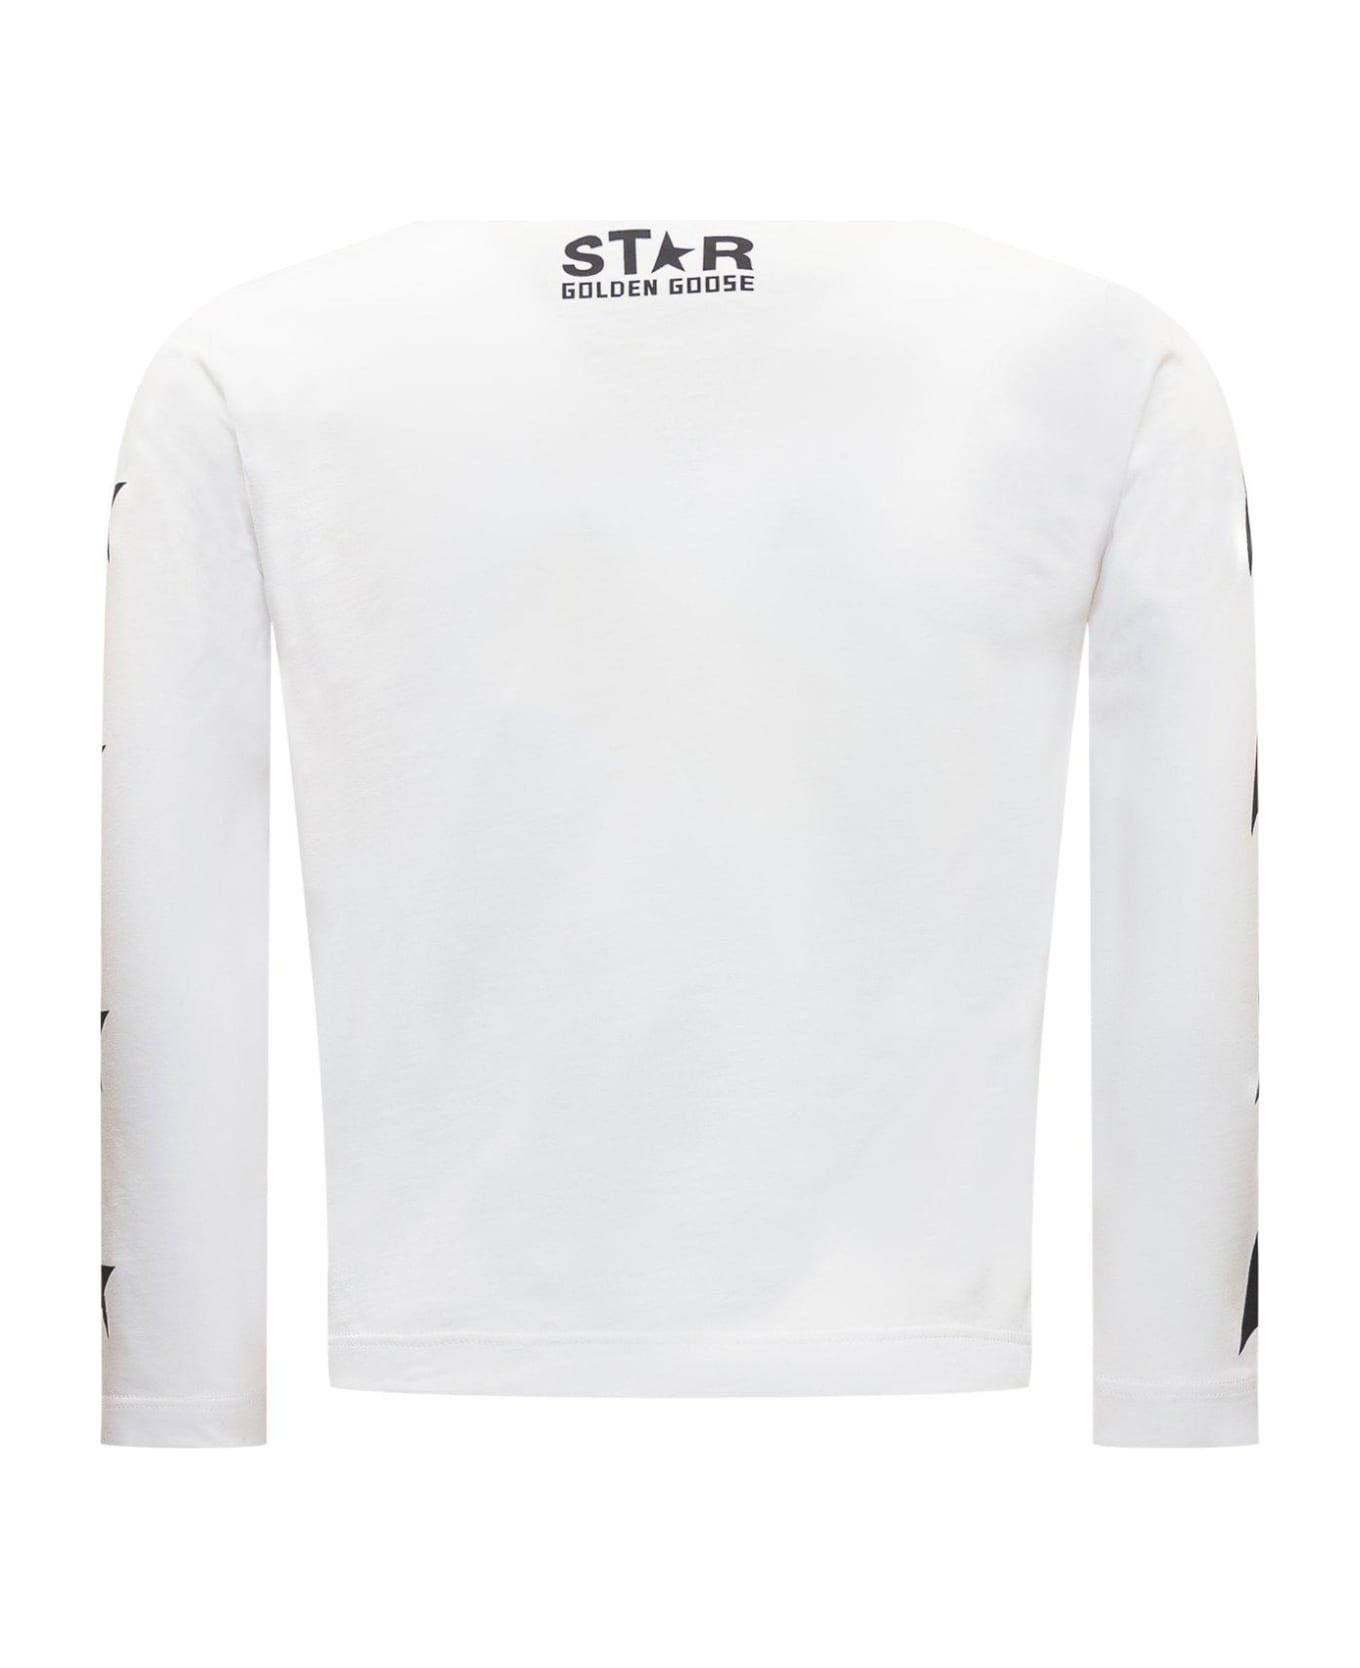 Golden Goose Star Printed Long Sleeved T-shirt Tシャツ＆ポロシャツ